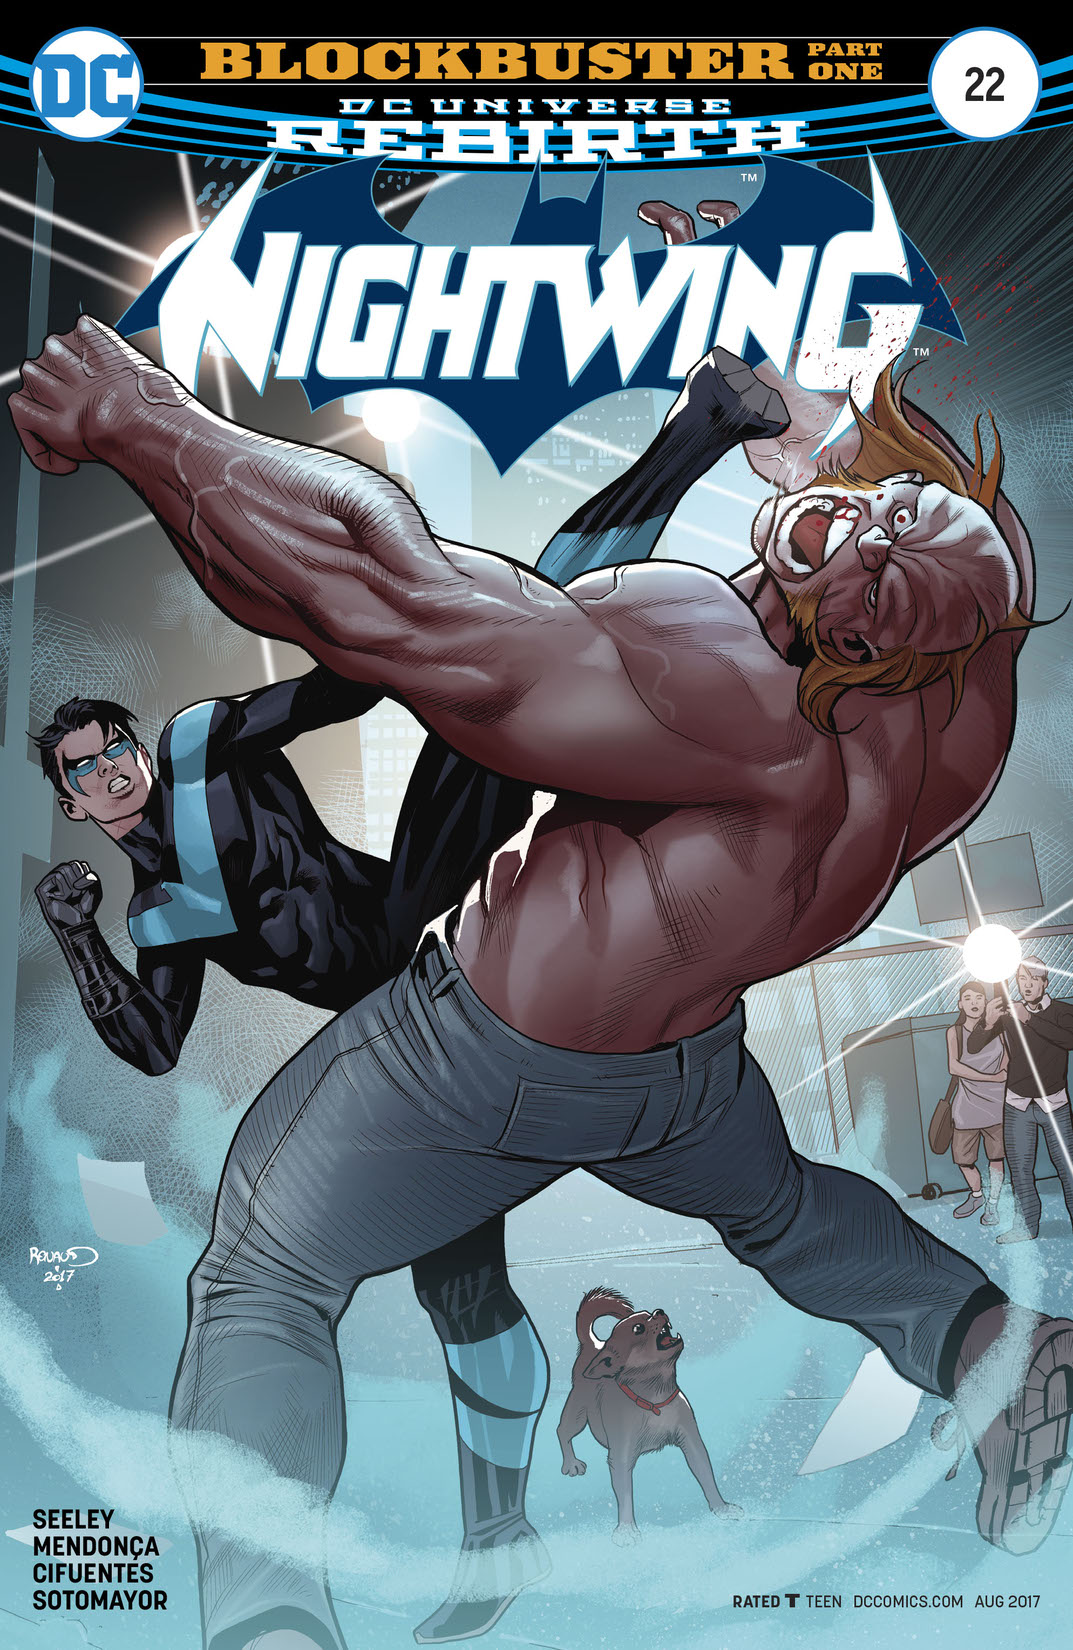 Nightwing (2016-) #22 preview images